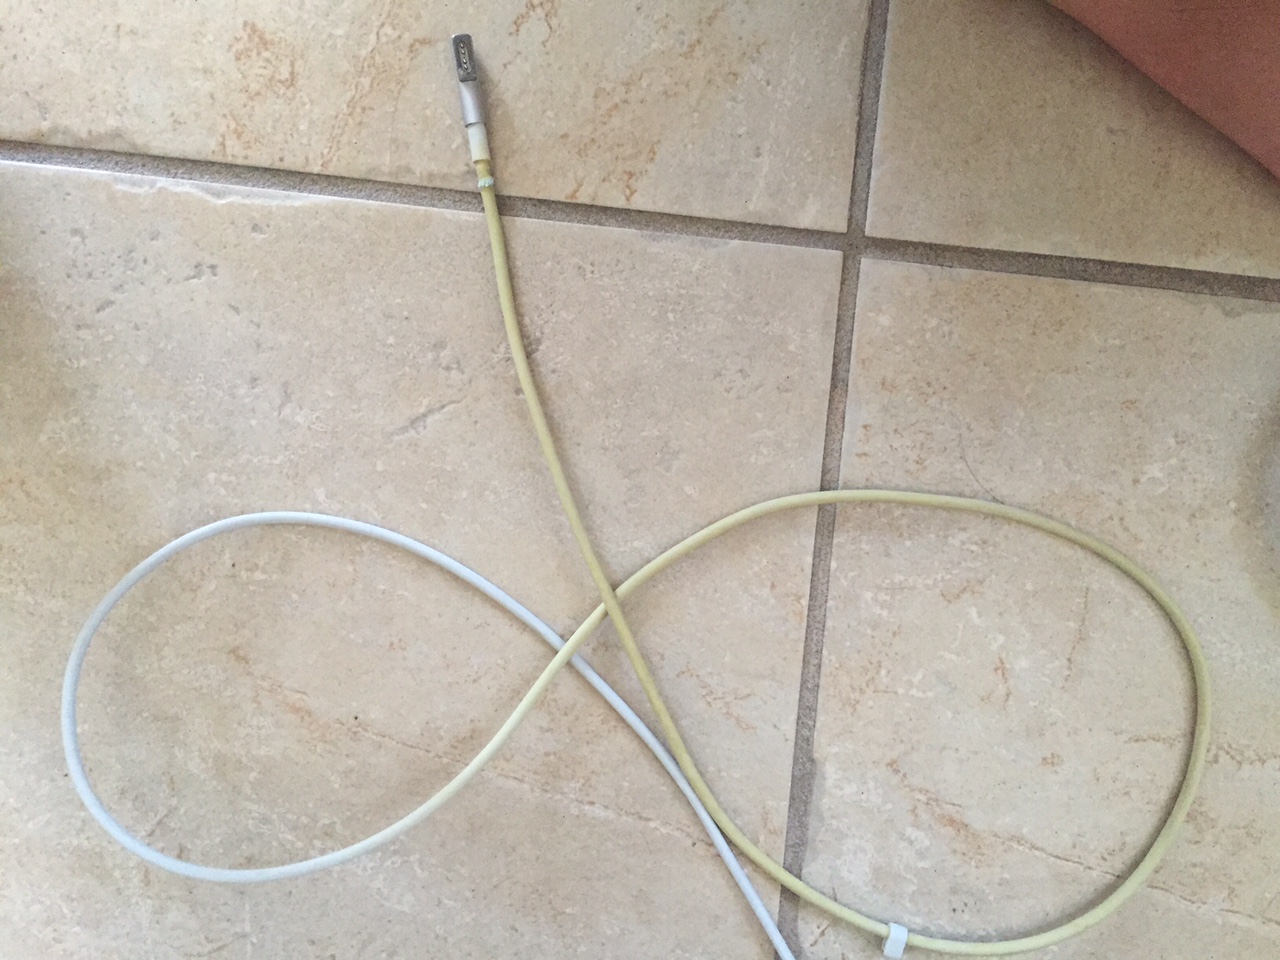 Can apple replace macbook pro charger siemens home connect